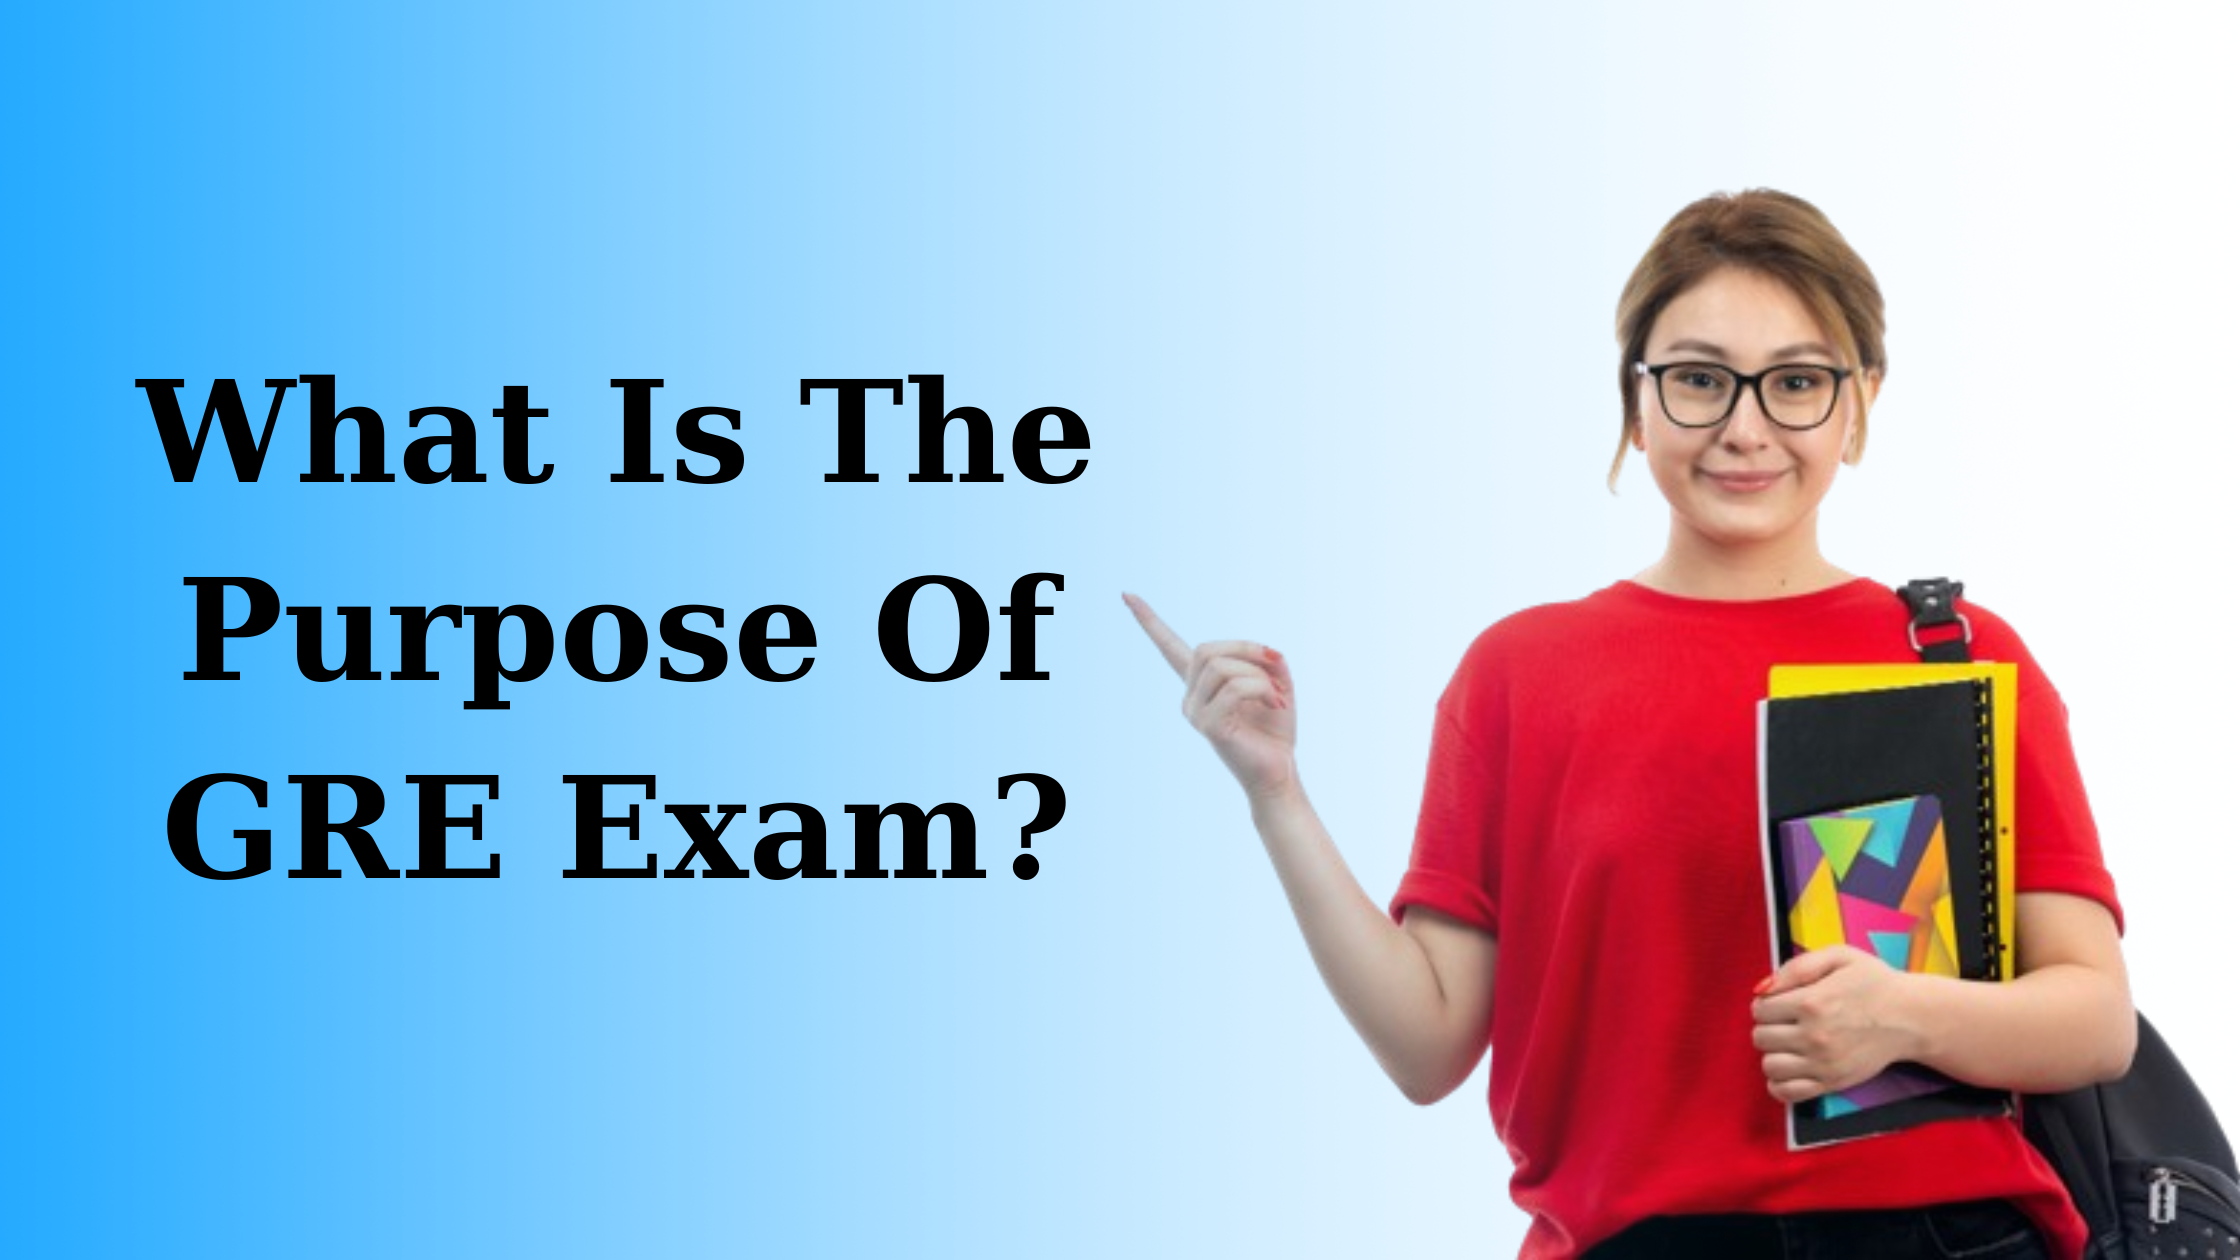 What Is The Purpose Of GRE Exam?